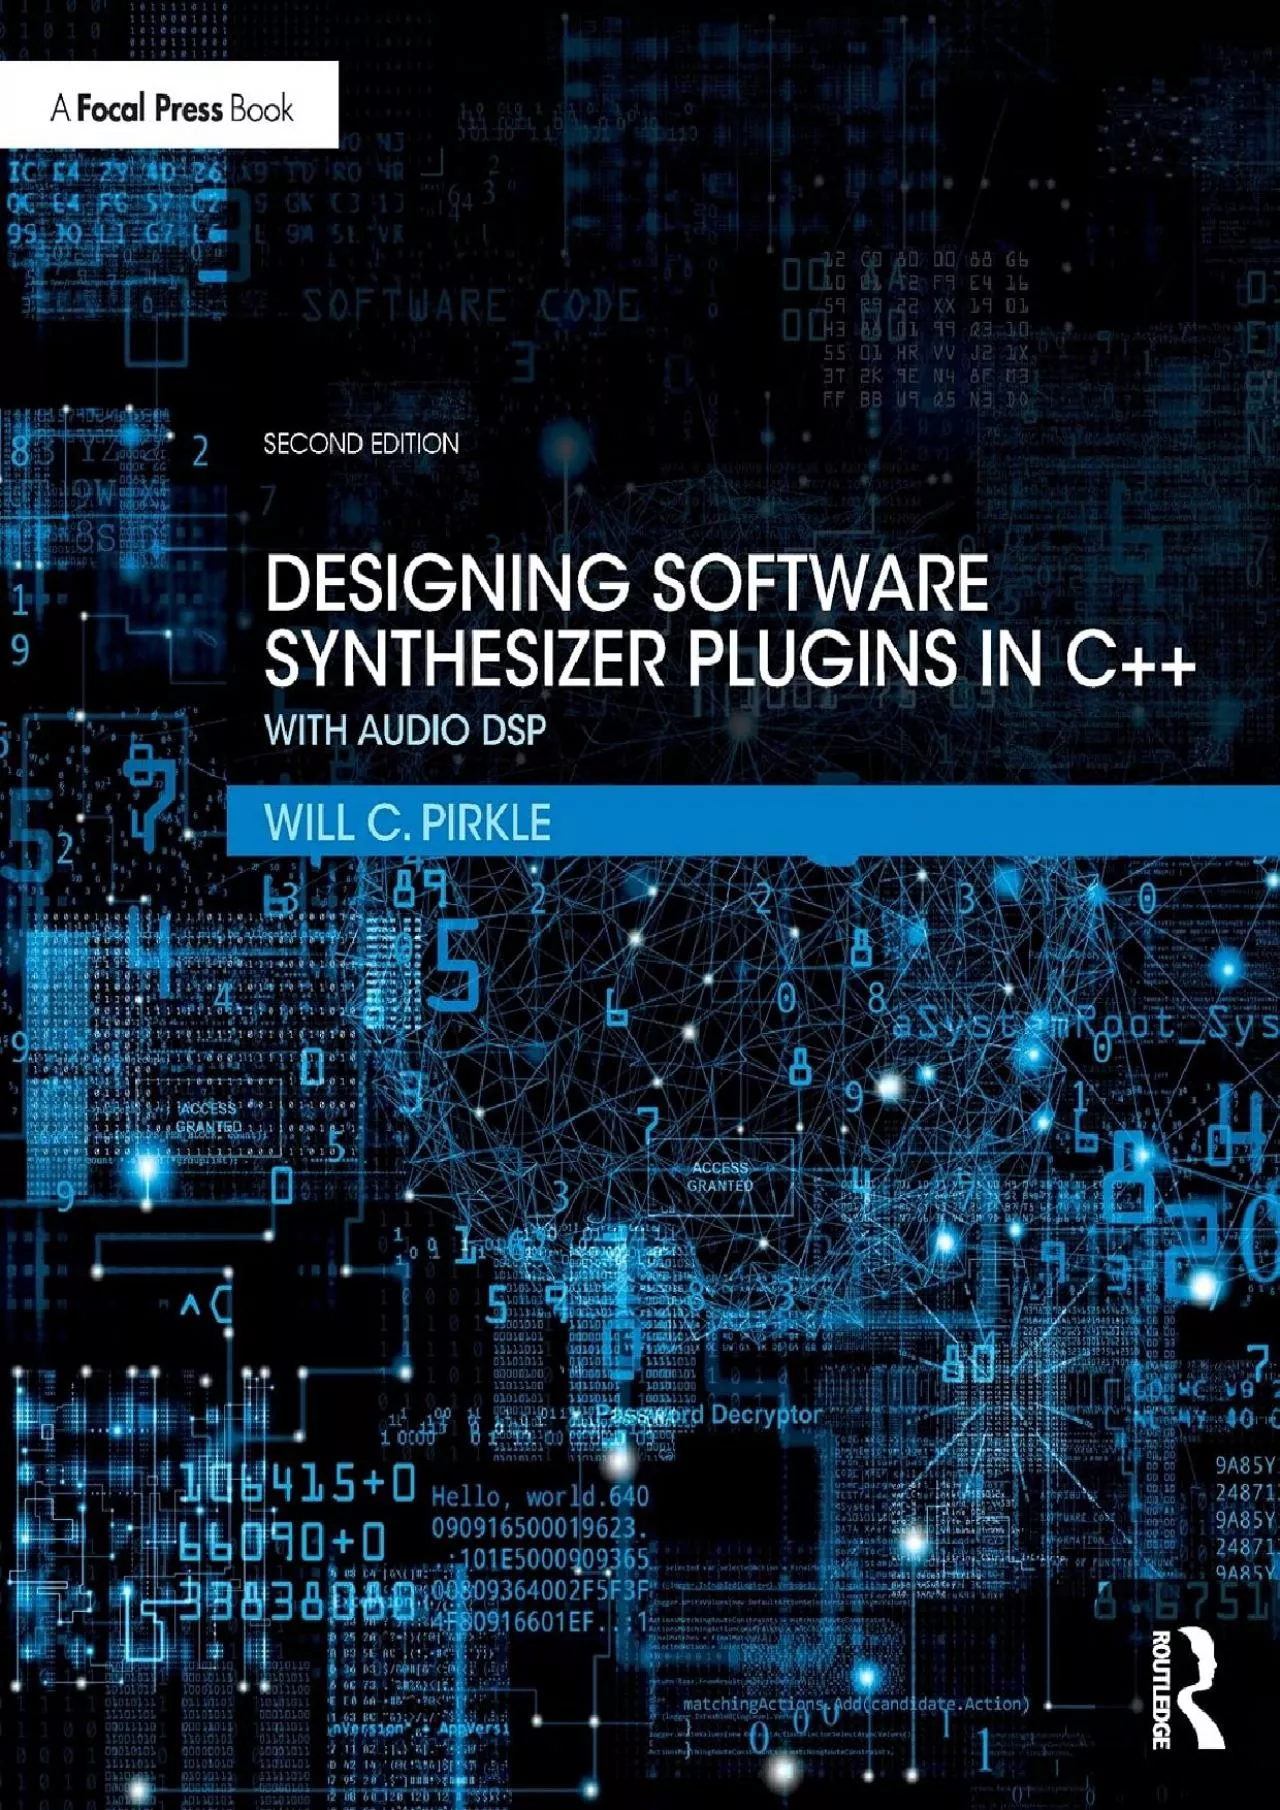 [READING BOOK]-Designing Software Synthesizer Plugins in C++